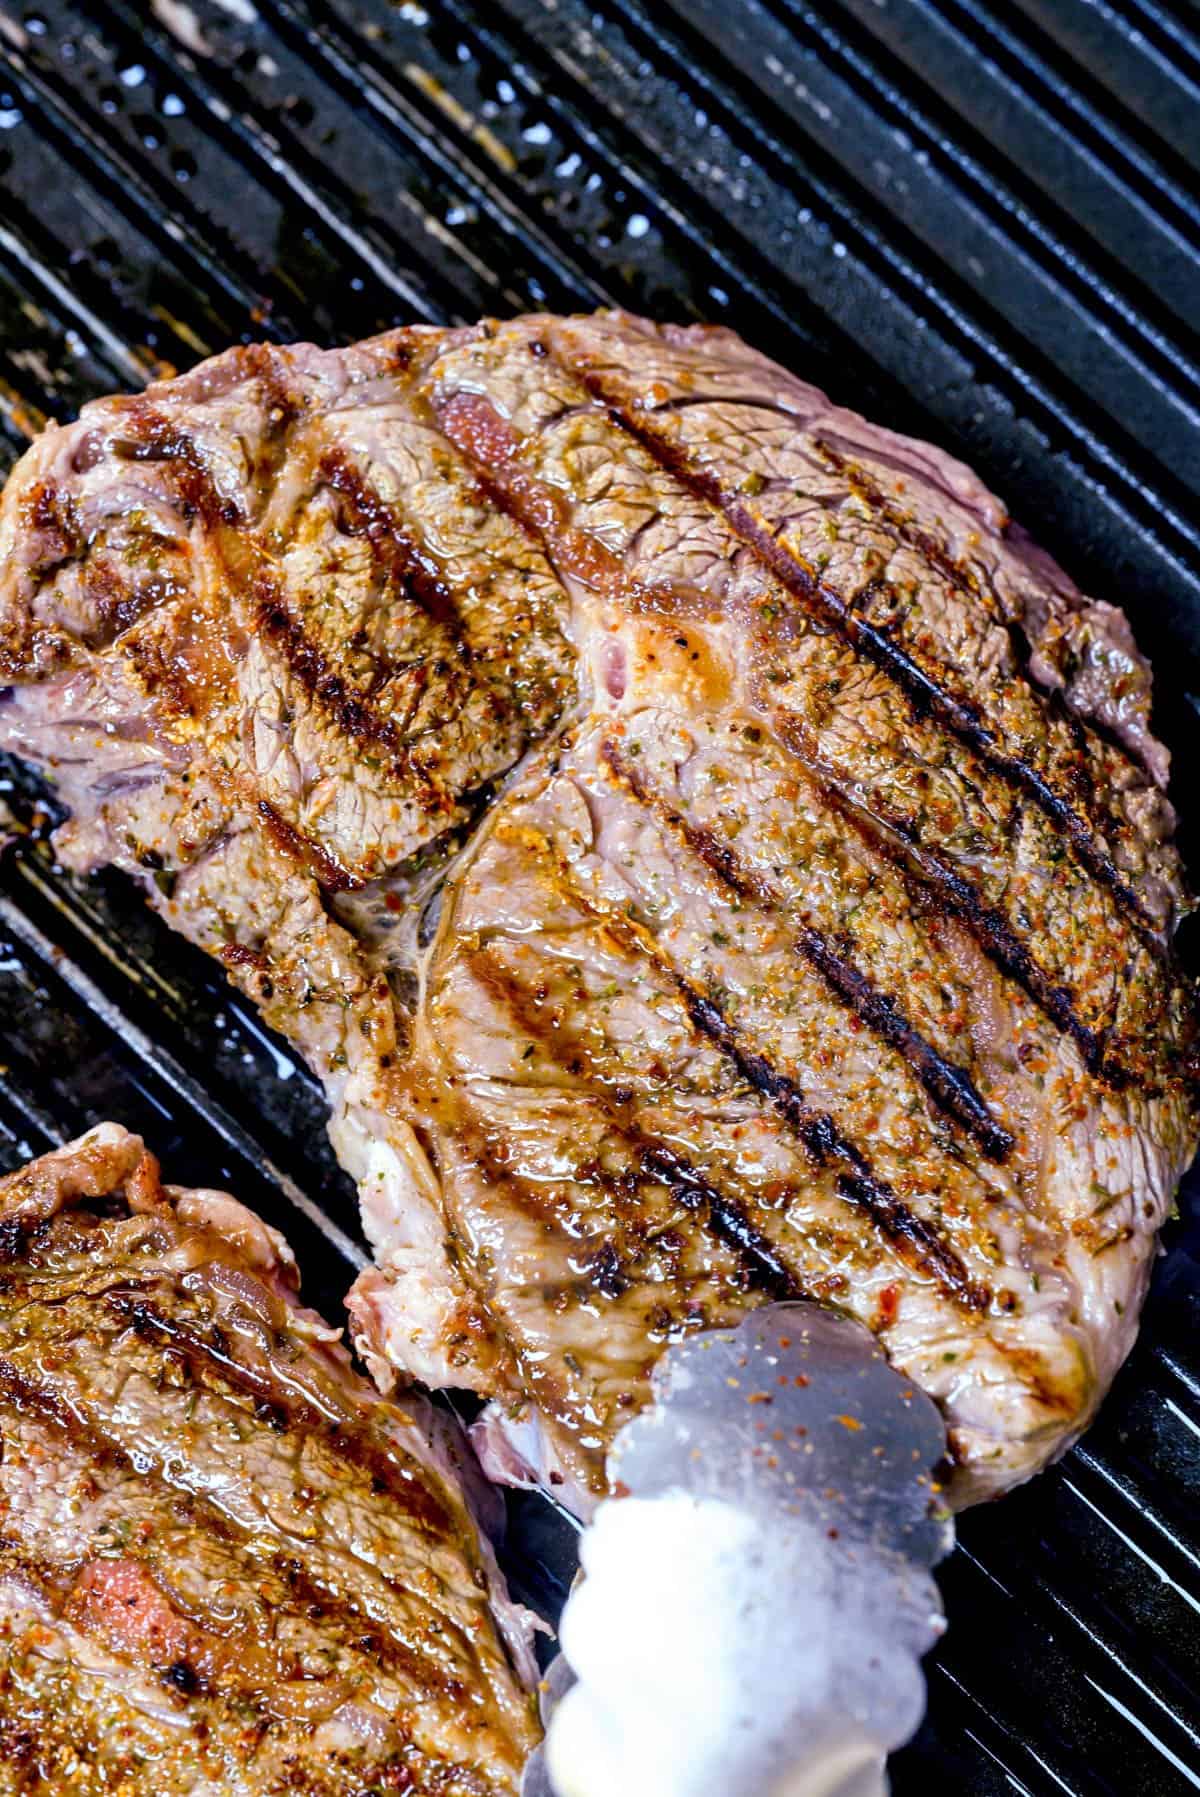 Grill marks on a seared steak.